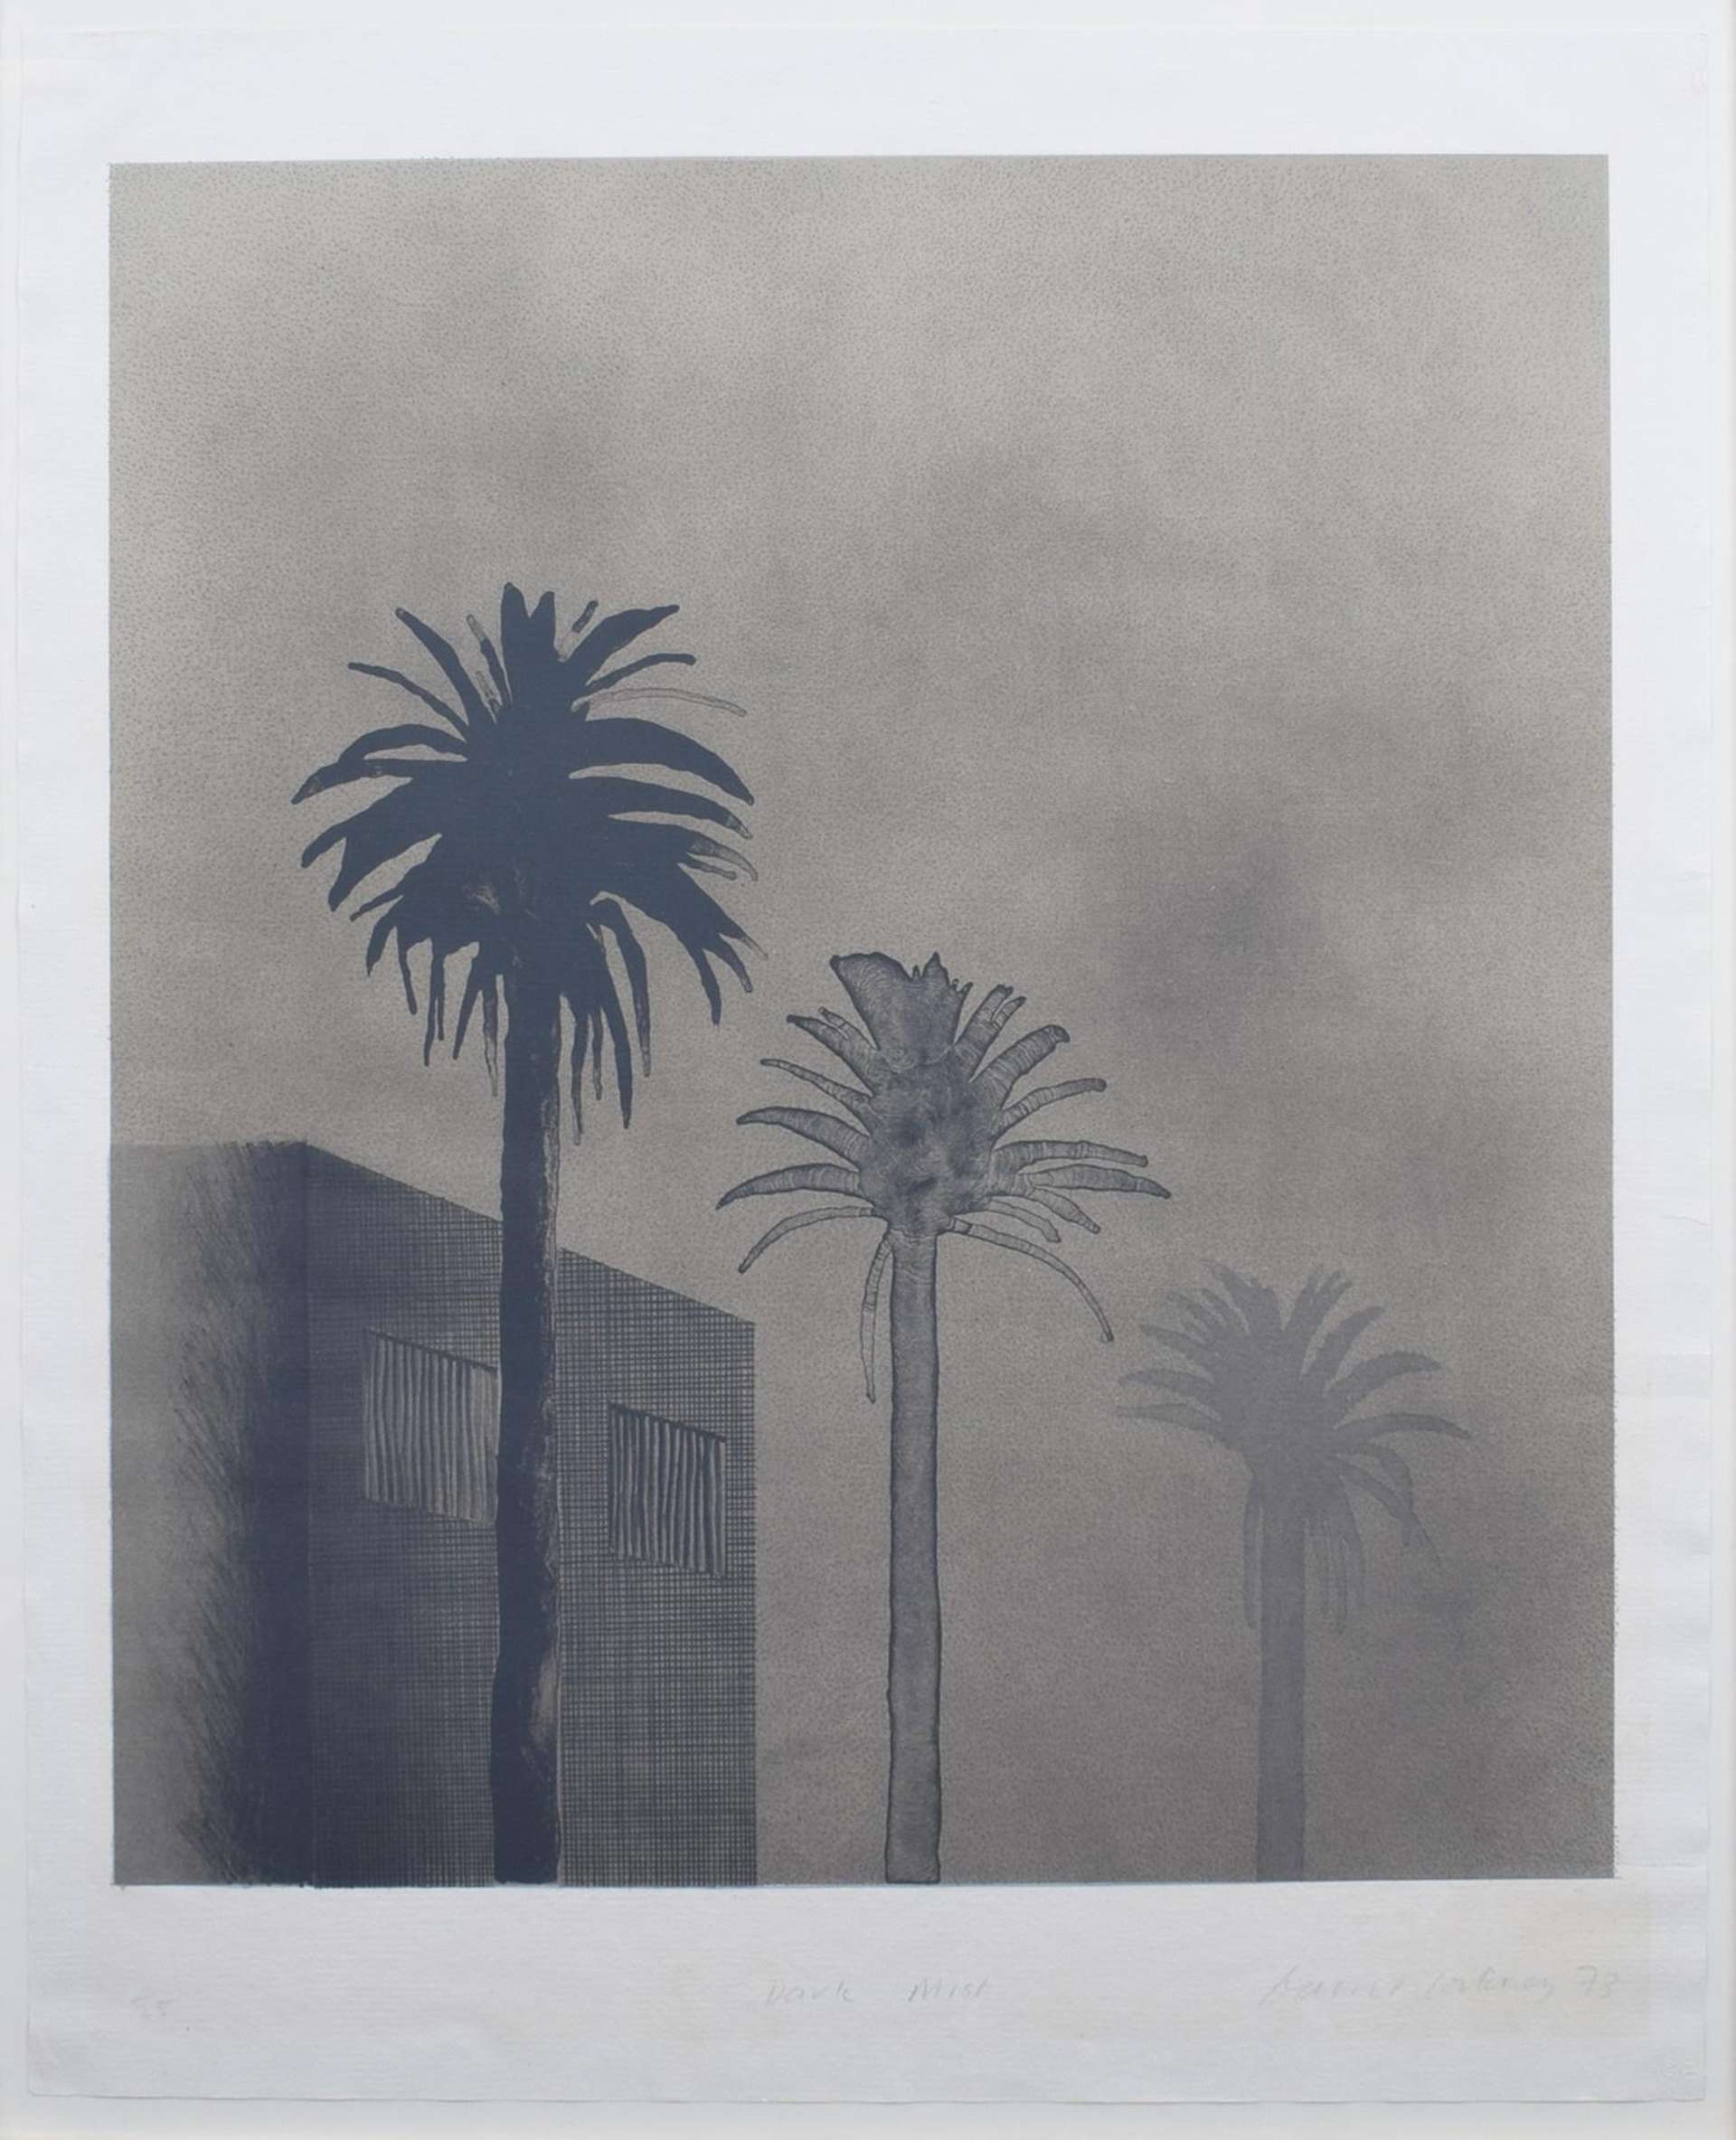 David Hockney's Dark Mist. A print of three palm trees in front of a building, covered by mist with a dark grey overcast